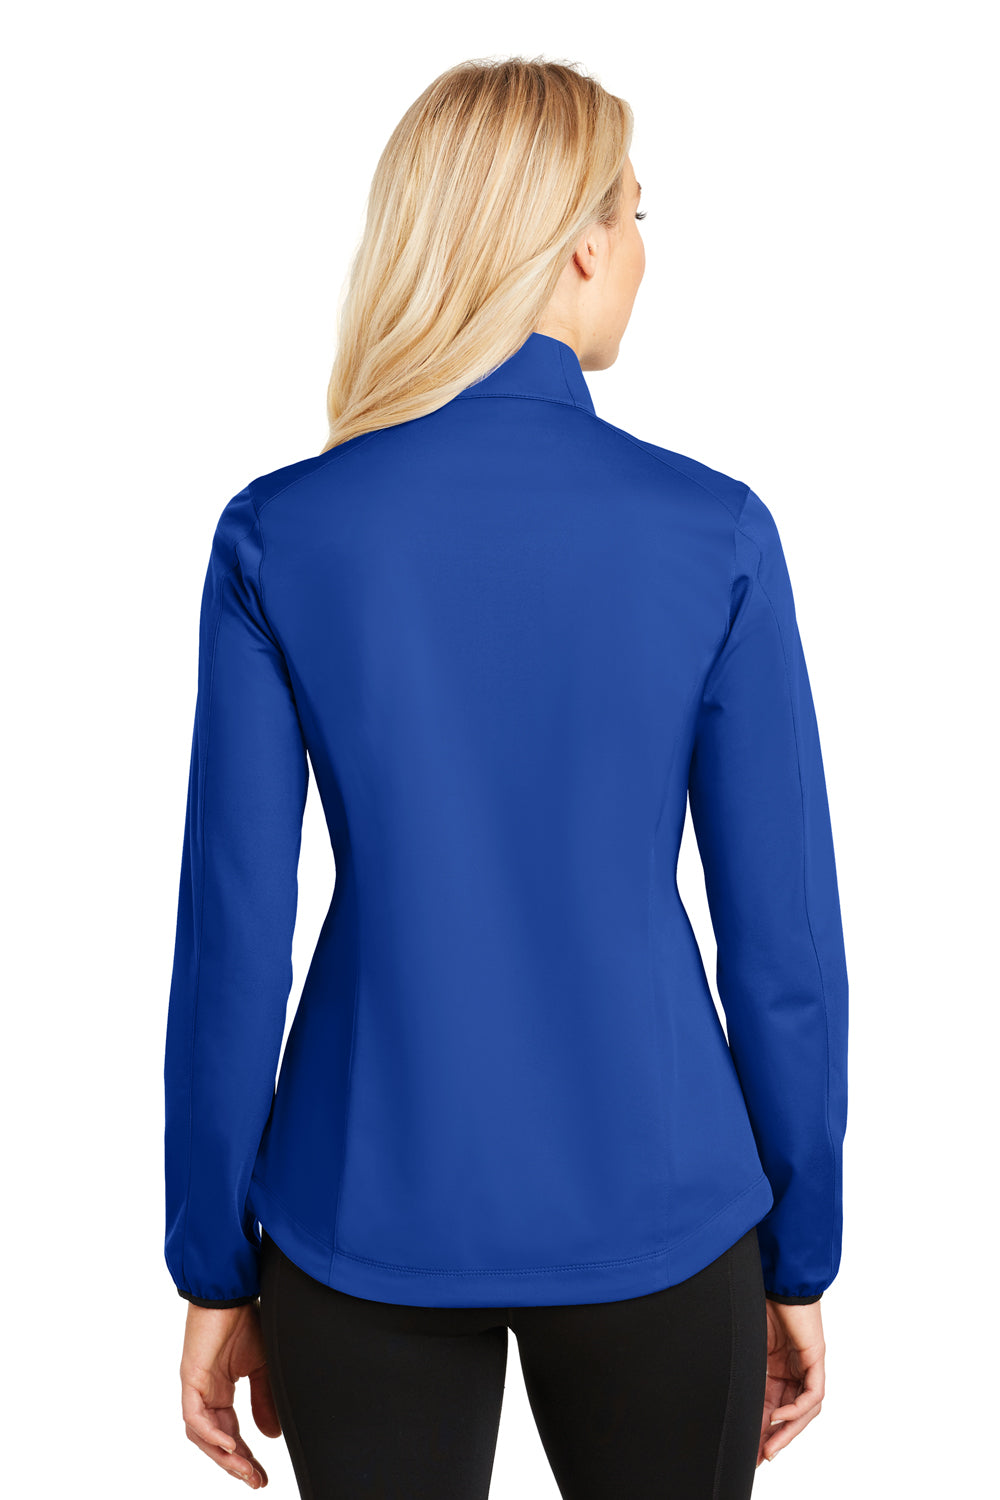 Port Authority L717 Womens Active Wind & Water Resistant Full Zip Jacket Royal Blue Back